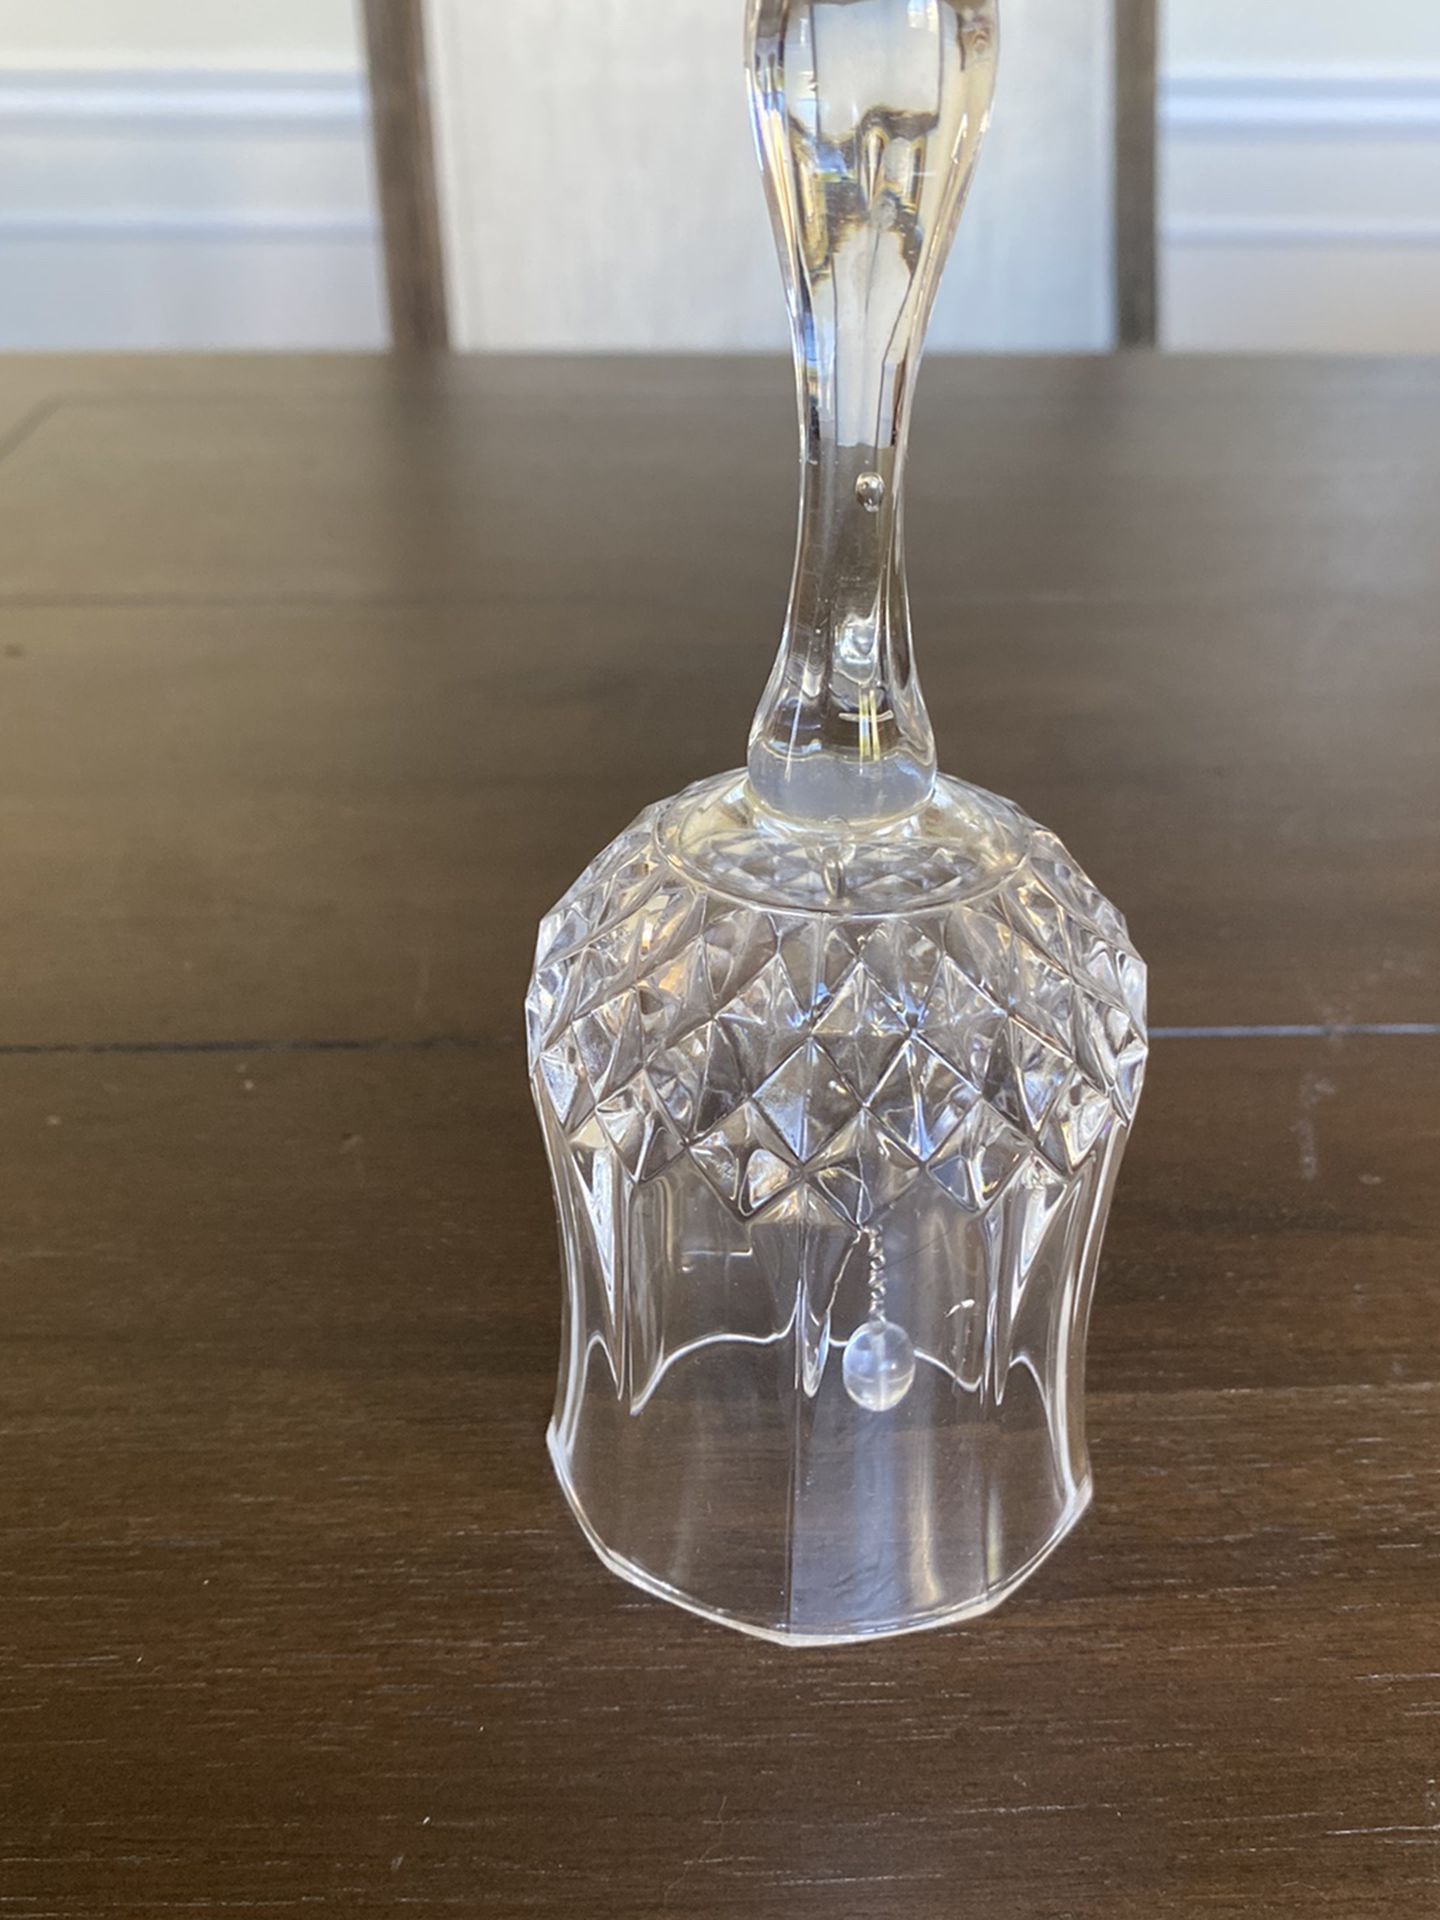 Brand new clear crystal dinner bell, measures 6” tall